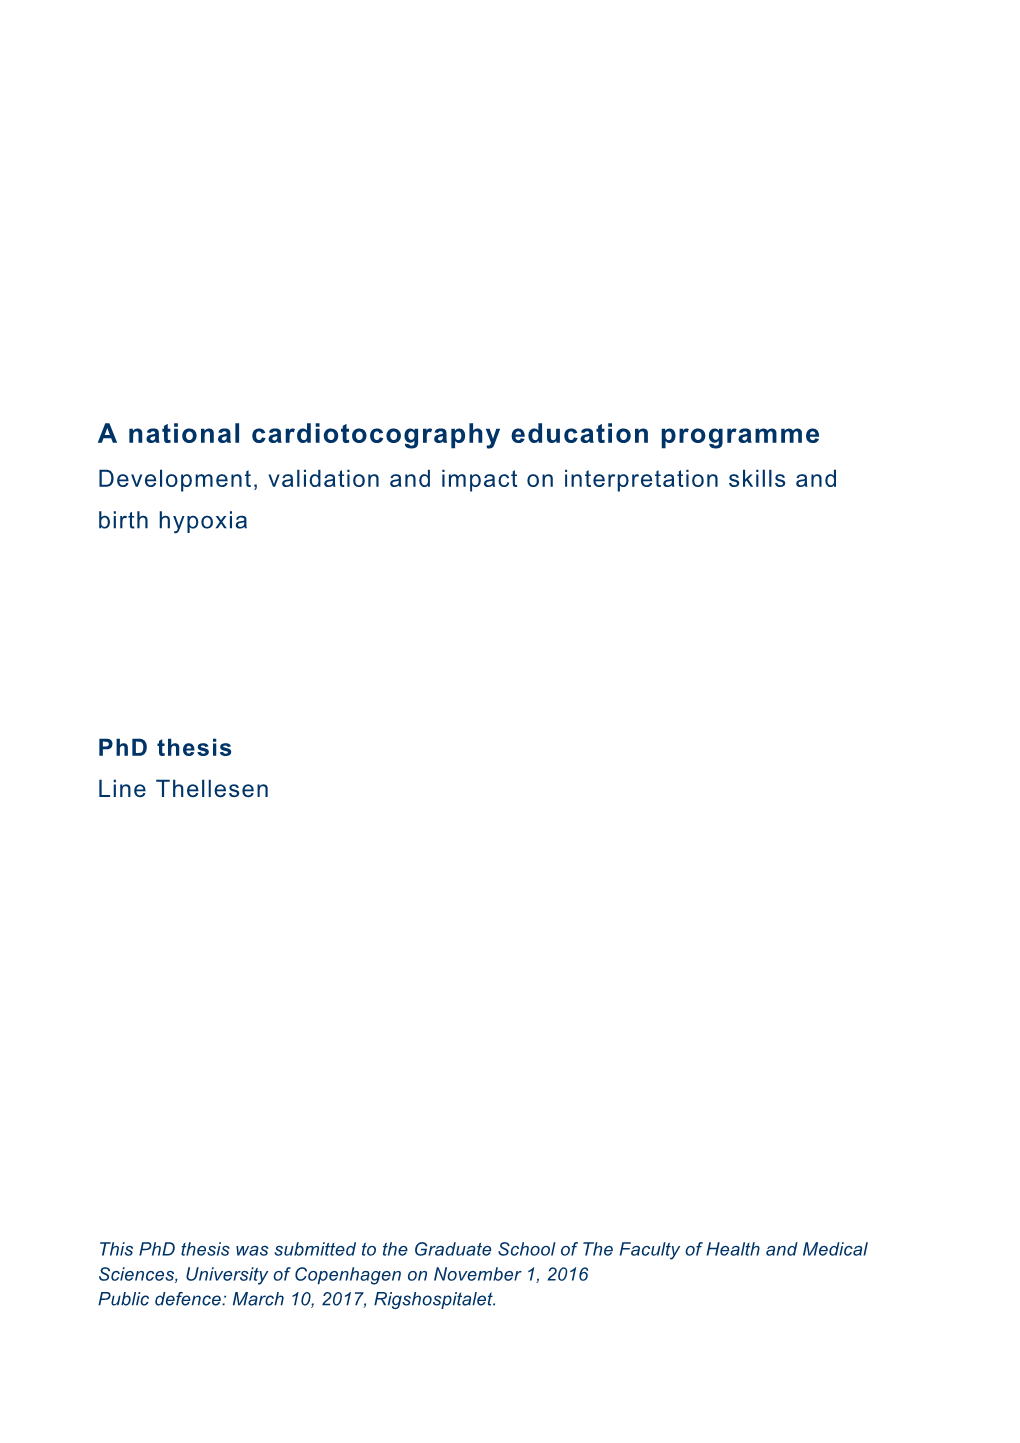 A National Cardiotocography Education Programme Development, Validation and Impact on Interpretation Skills and Birth Hypoxia